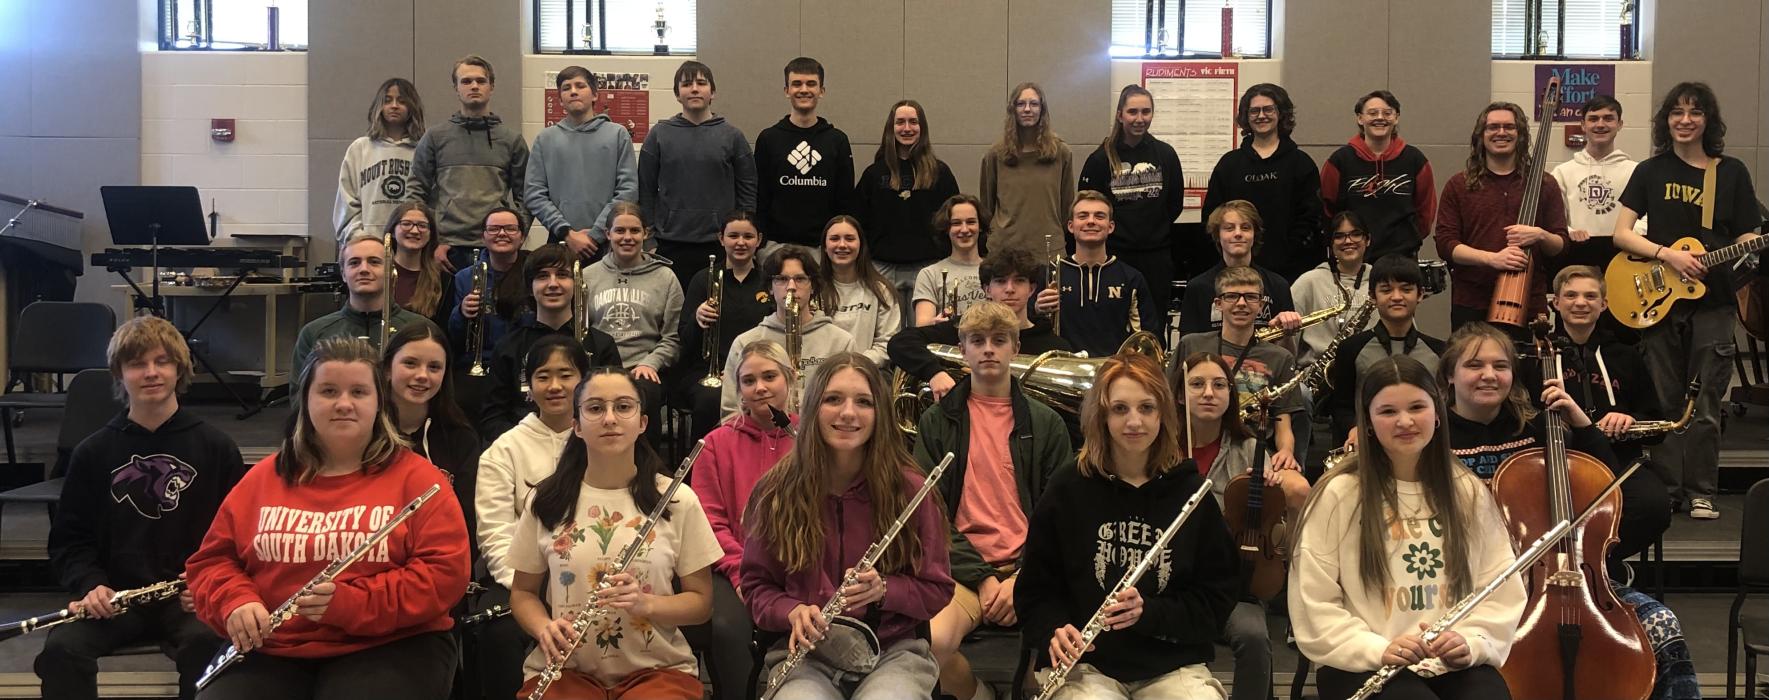 Multiple Panther band students competed in Lennox on Feb. 28. Pictured are, front from left, Jordyn Newman, Shia DeAnda, Kaylee Wieck, Aurora Happe and Kyla Bacan; second, Brendan Lindsey, Mia Riibe, Tyra Yi, Kira Armstrong, Bennett Jensen, Madison DeAnda and Bobbie Gorter; third, James Wakeland, Max Boelter, Owen Oberg, Isaac Klemme, Nathan Rathgeber, David Thieman and Garrett Hanson; fourth, Lauren Messersmith, Chloe Strawn, Stella Carlson, Jae Bacan, Emma Barnett, Lewis Pick, Nick Hanson, Owen Norby and 